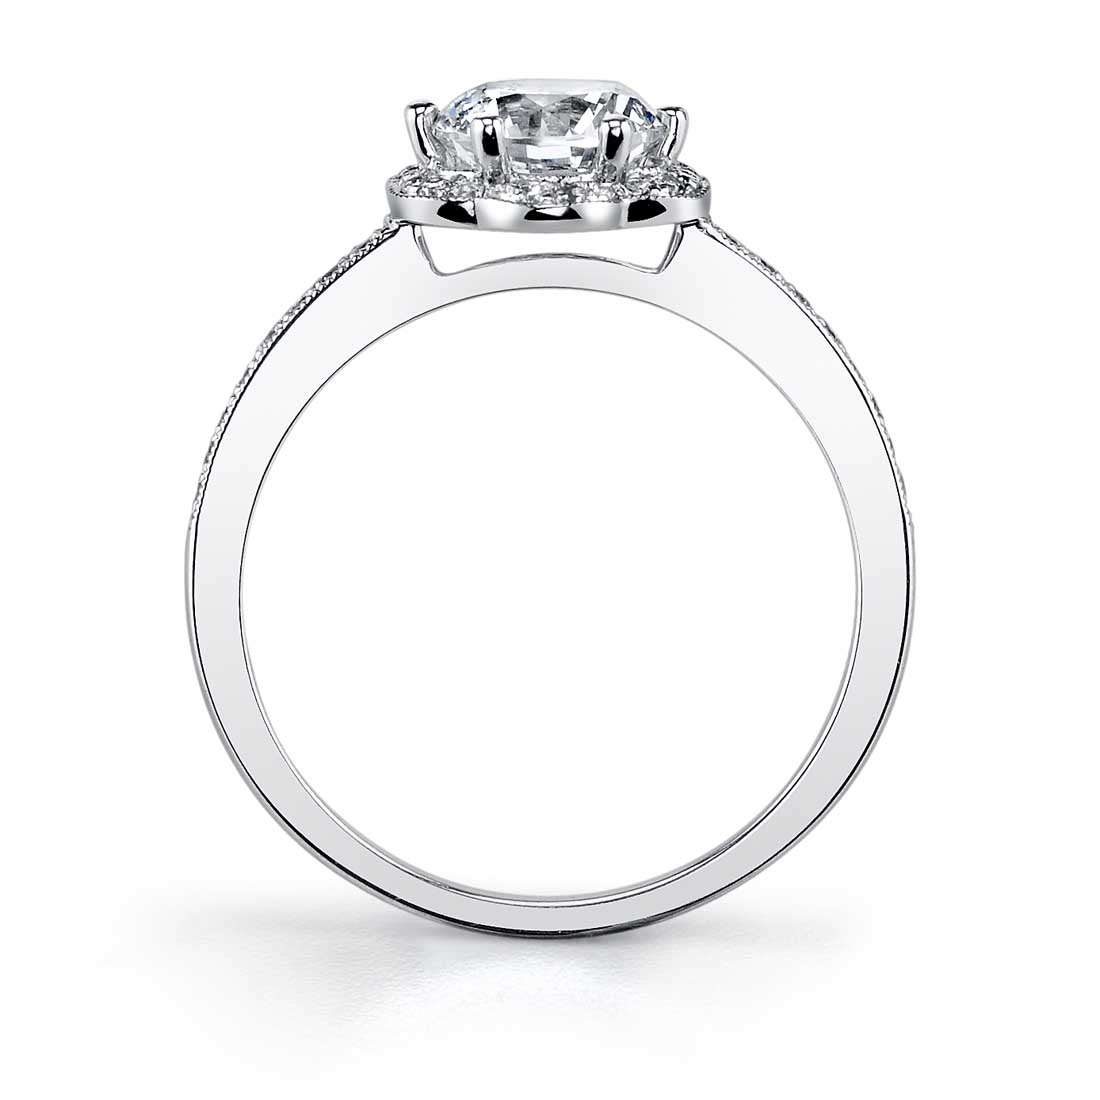 Profile Image of a Flower Halo Engagement Ring